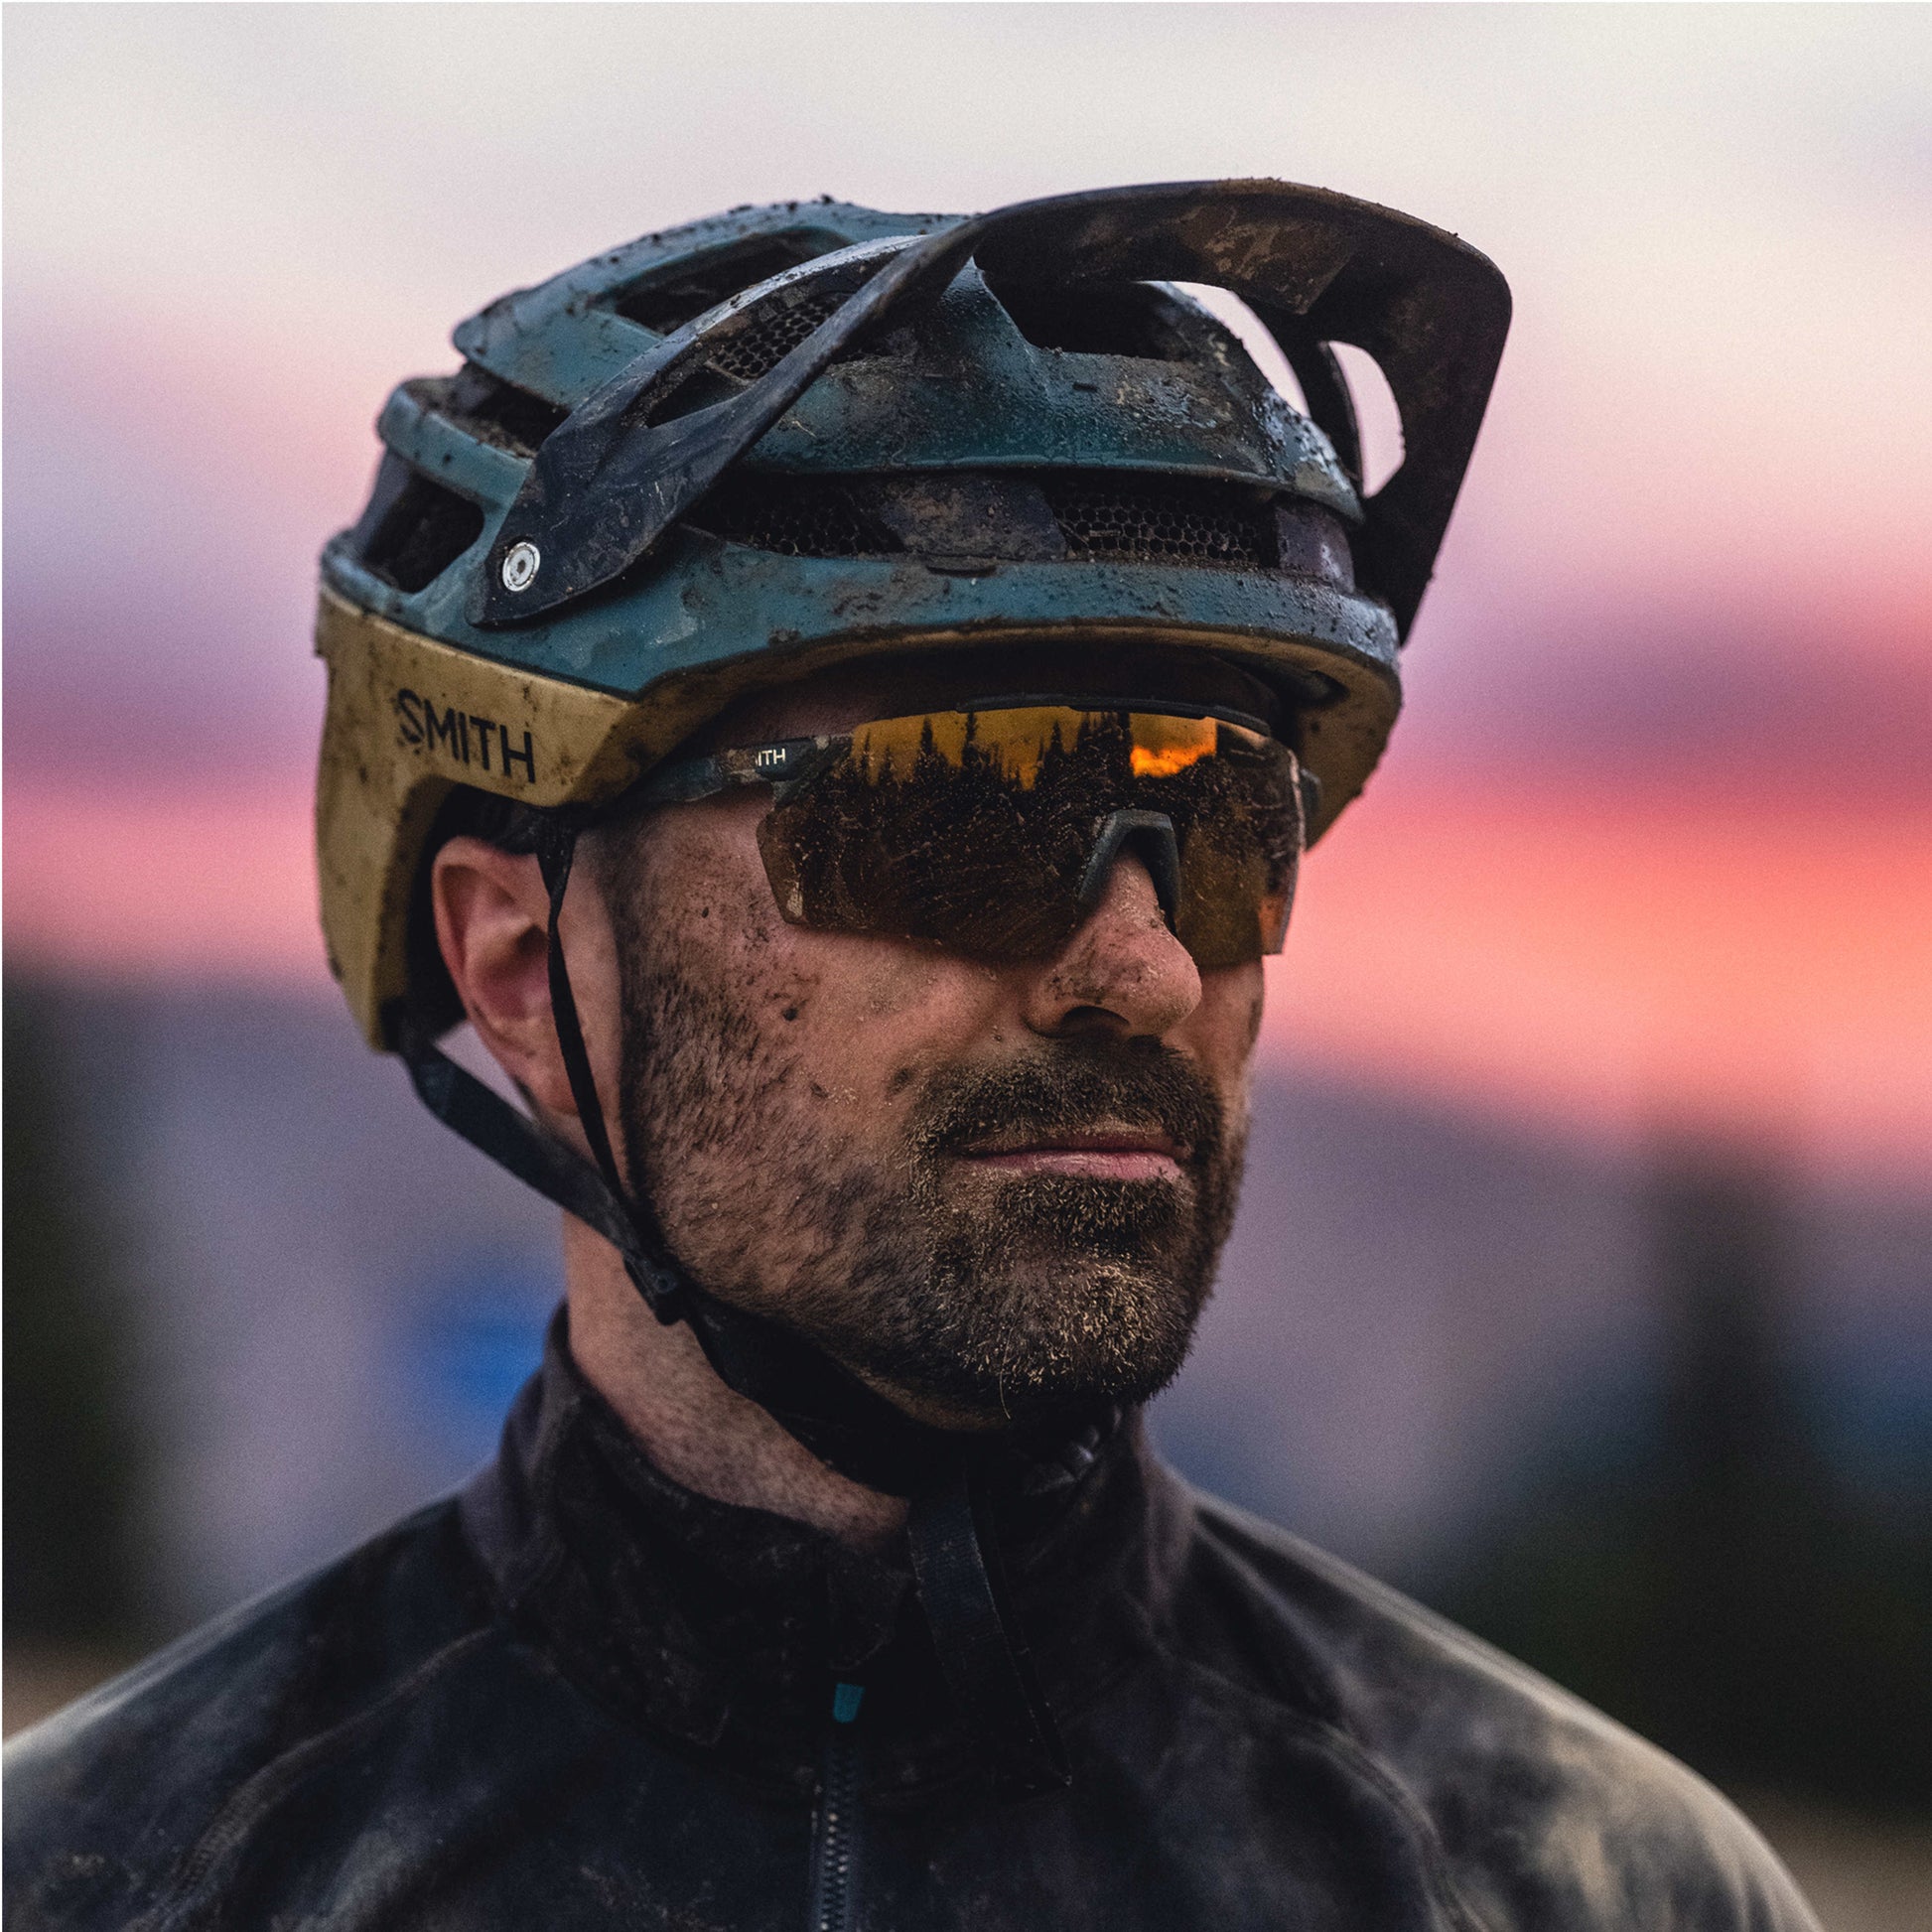 Smith Optics Forefront MIPS MTB Trail Helmet man wearing helmet with glasses